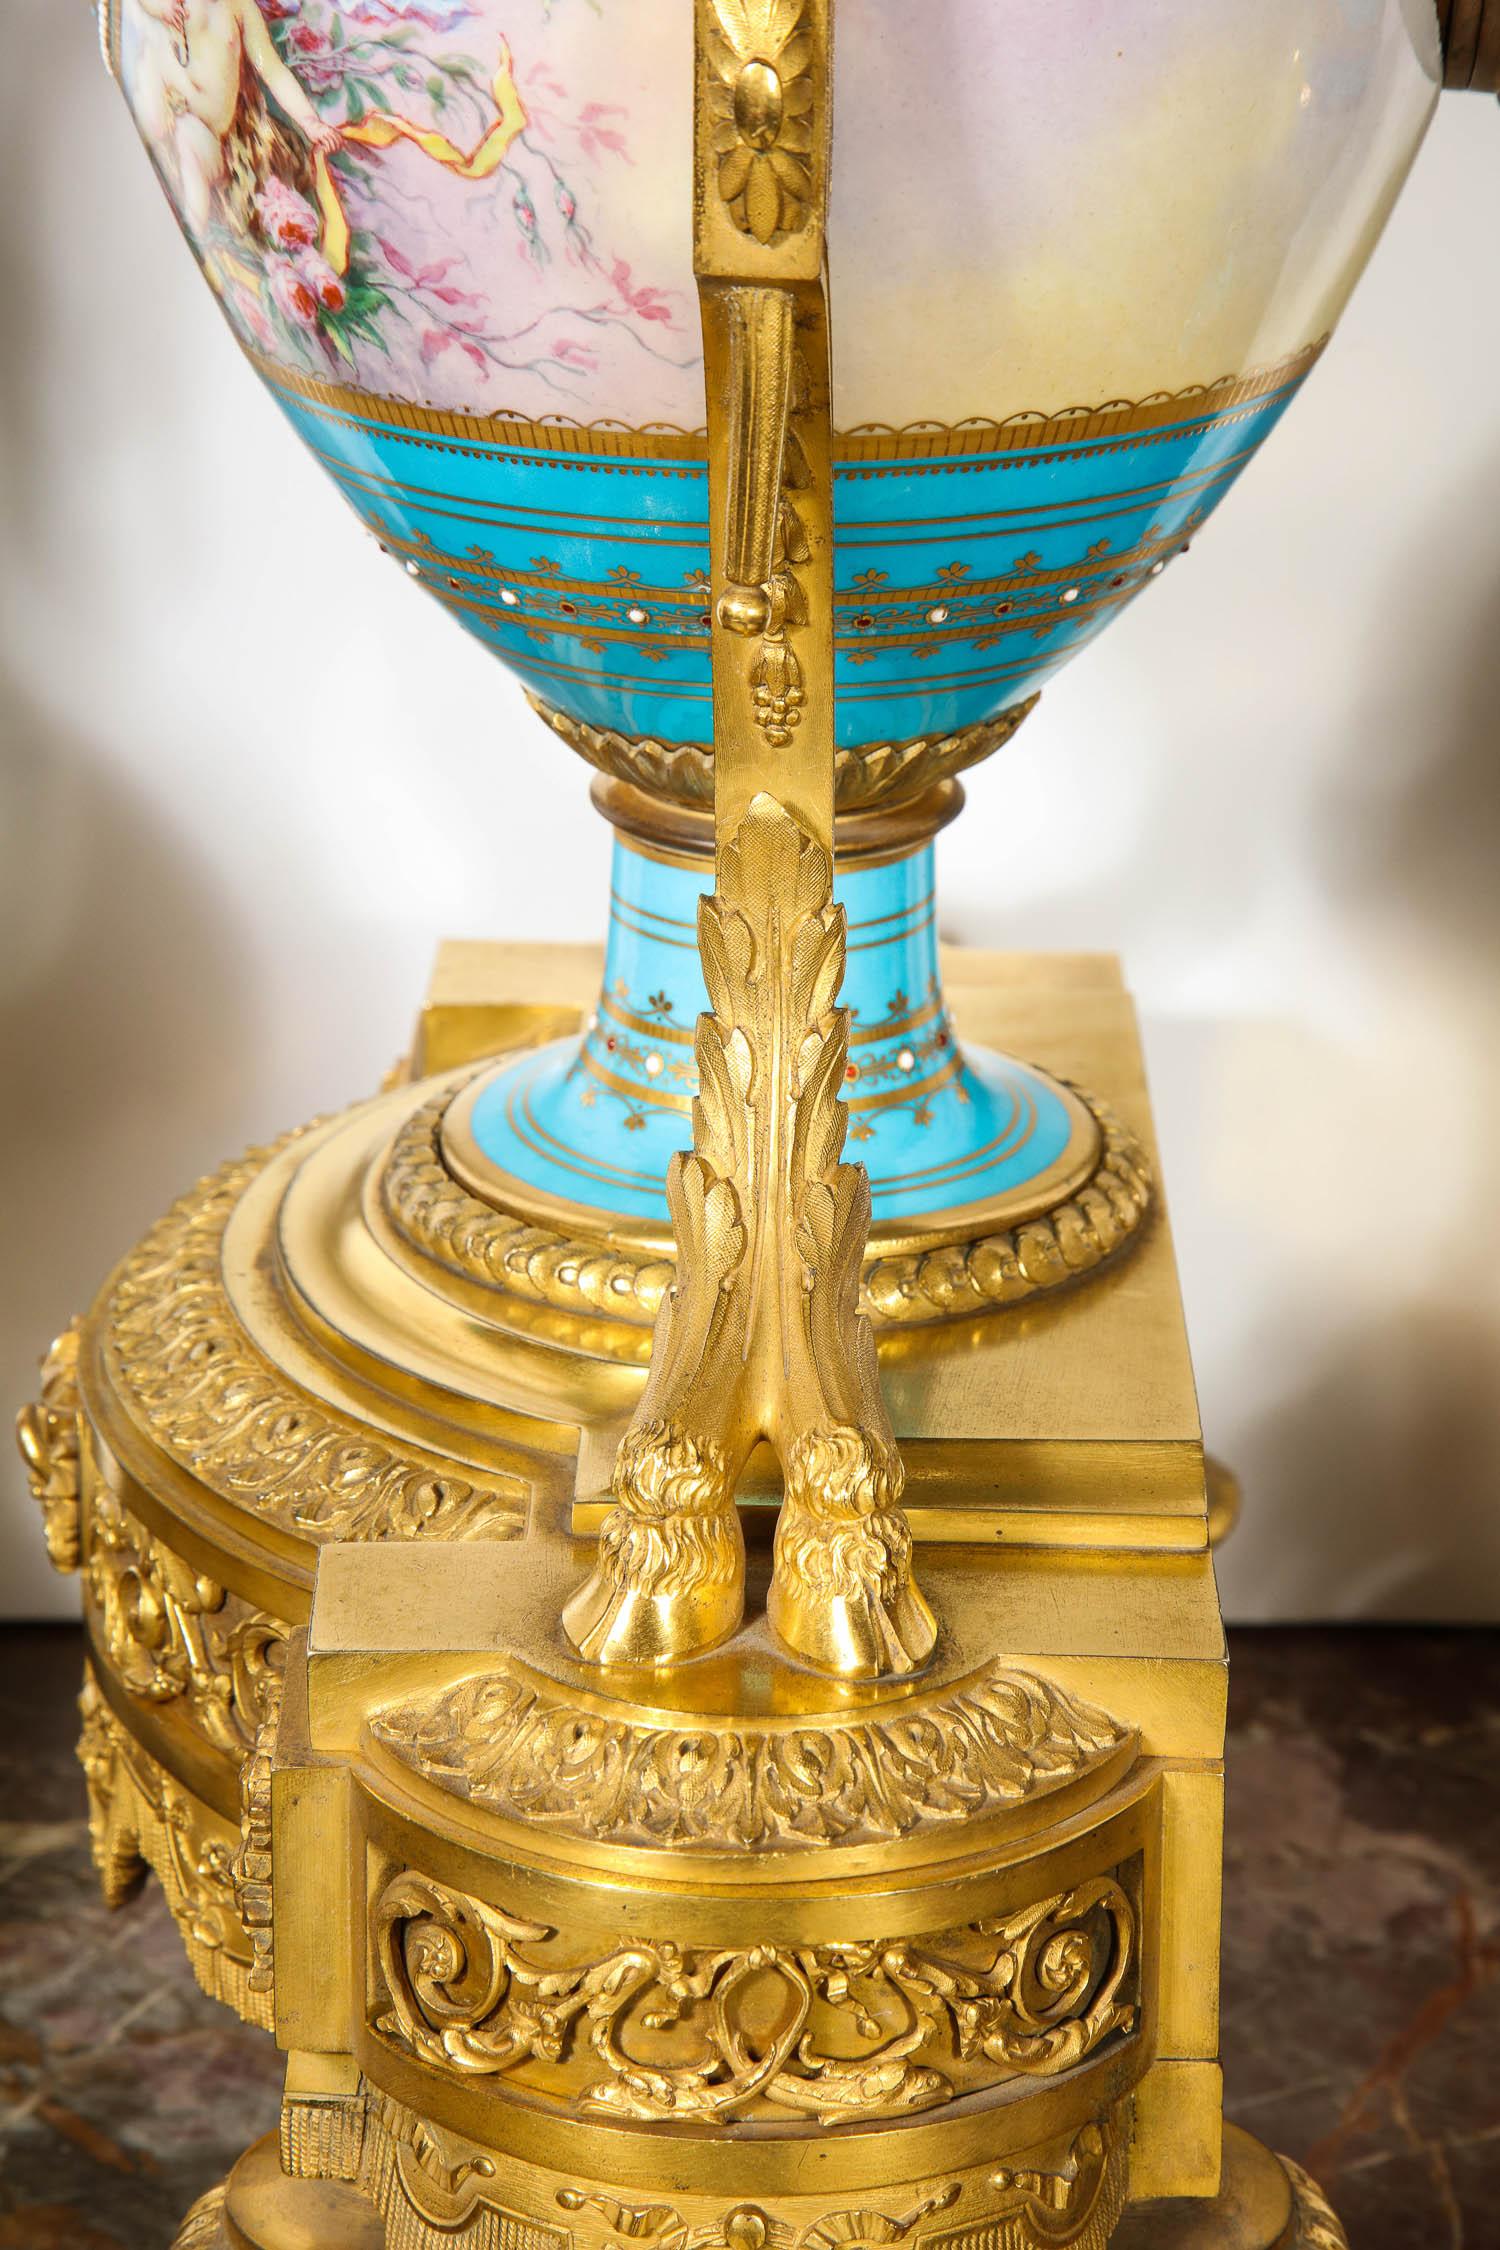 Exceptional French Ormolu-Mounted Turquoise Jeweled Sevres Porcelain Clock Set For Sale 10